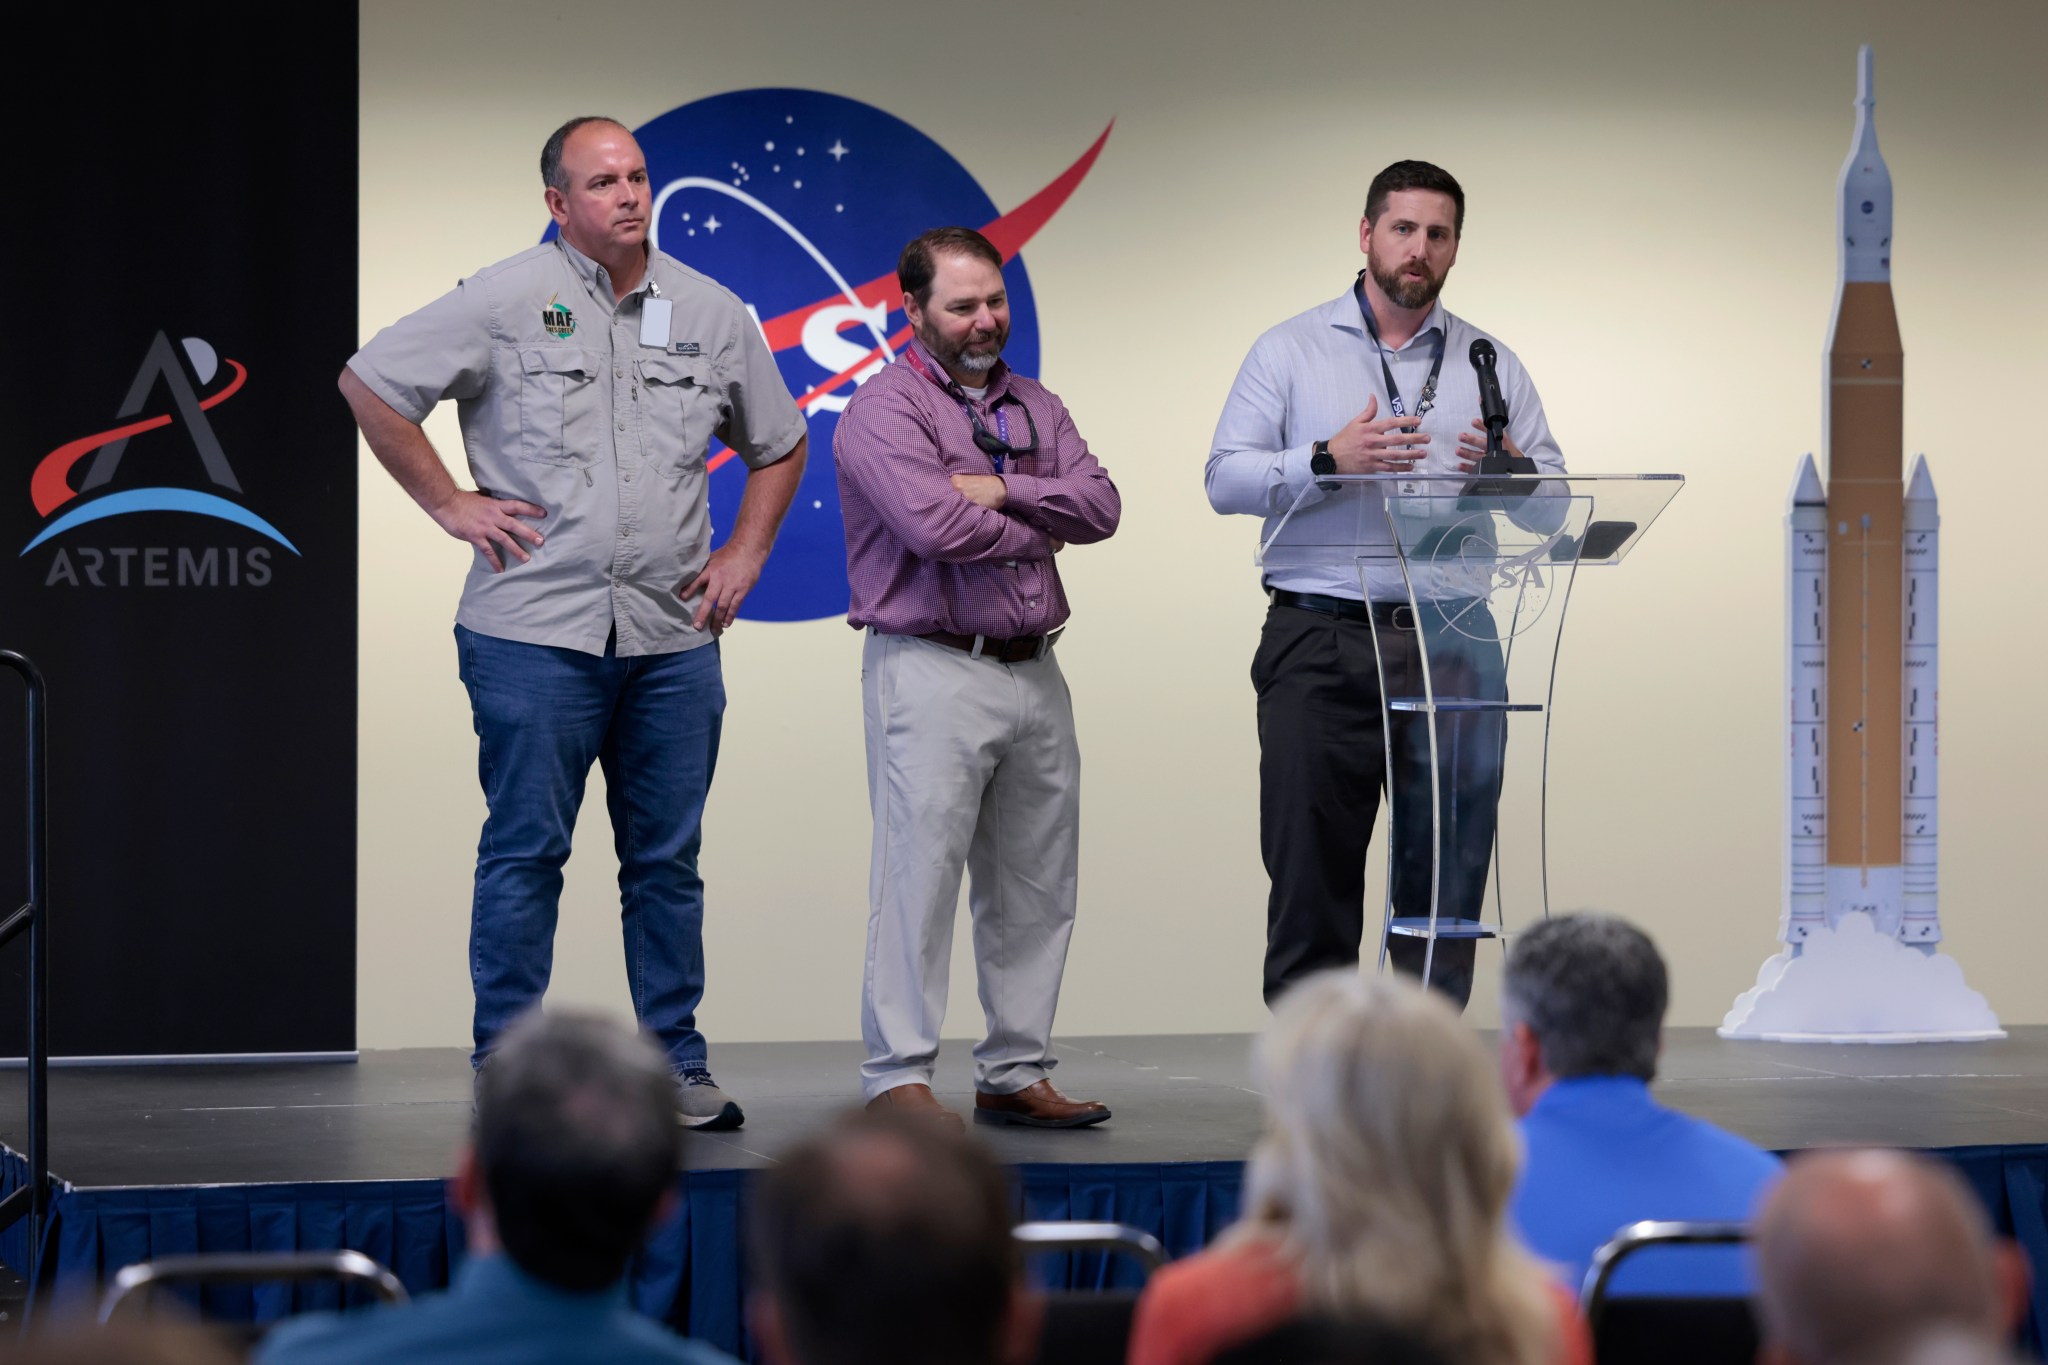 MAF Ambassadors Ben Ferrell, Jesse Lemonte, and Kevin Stiede address attendees on NASA 2040 and other Marshall Space Flight Center’s Center Action Team initiatives.